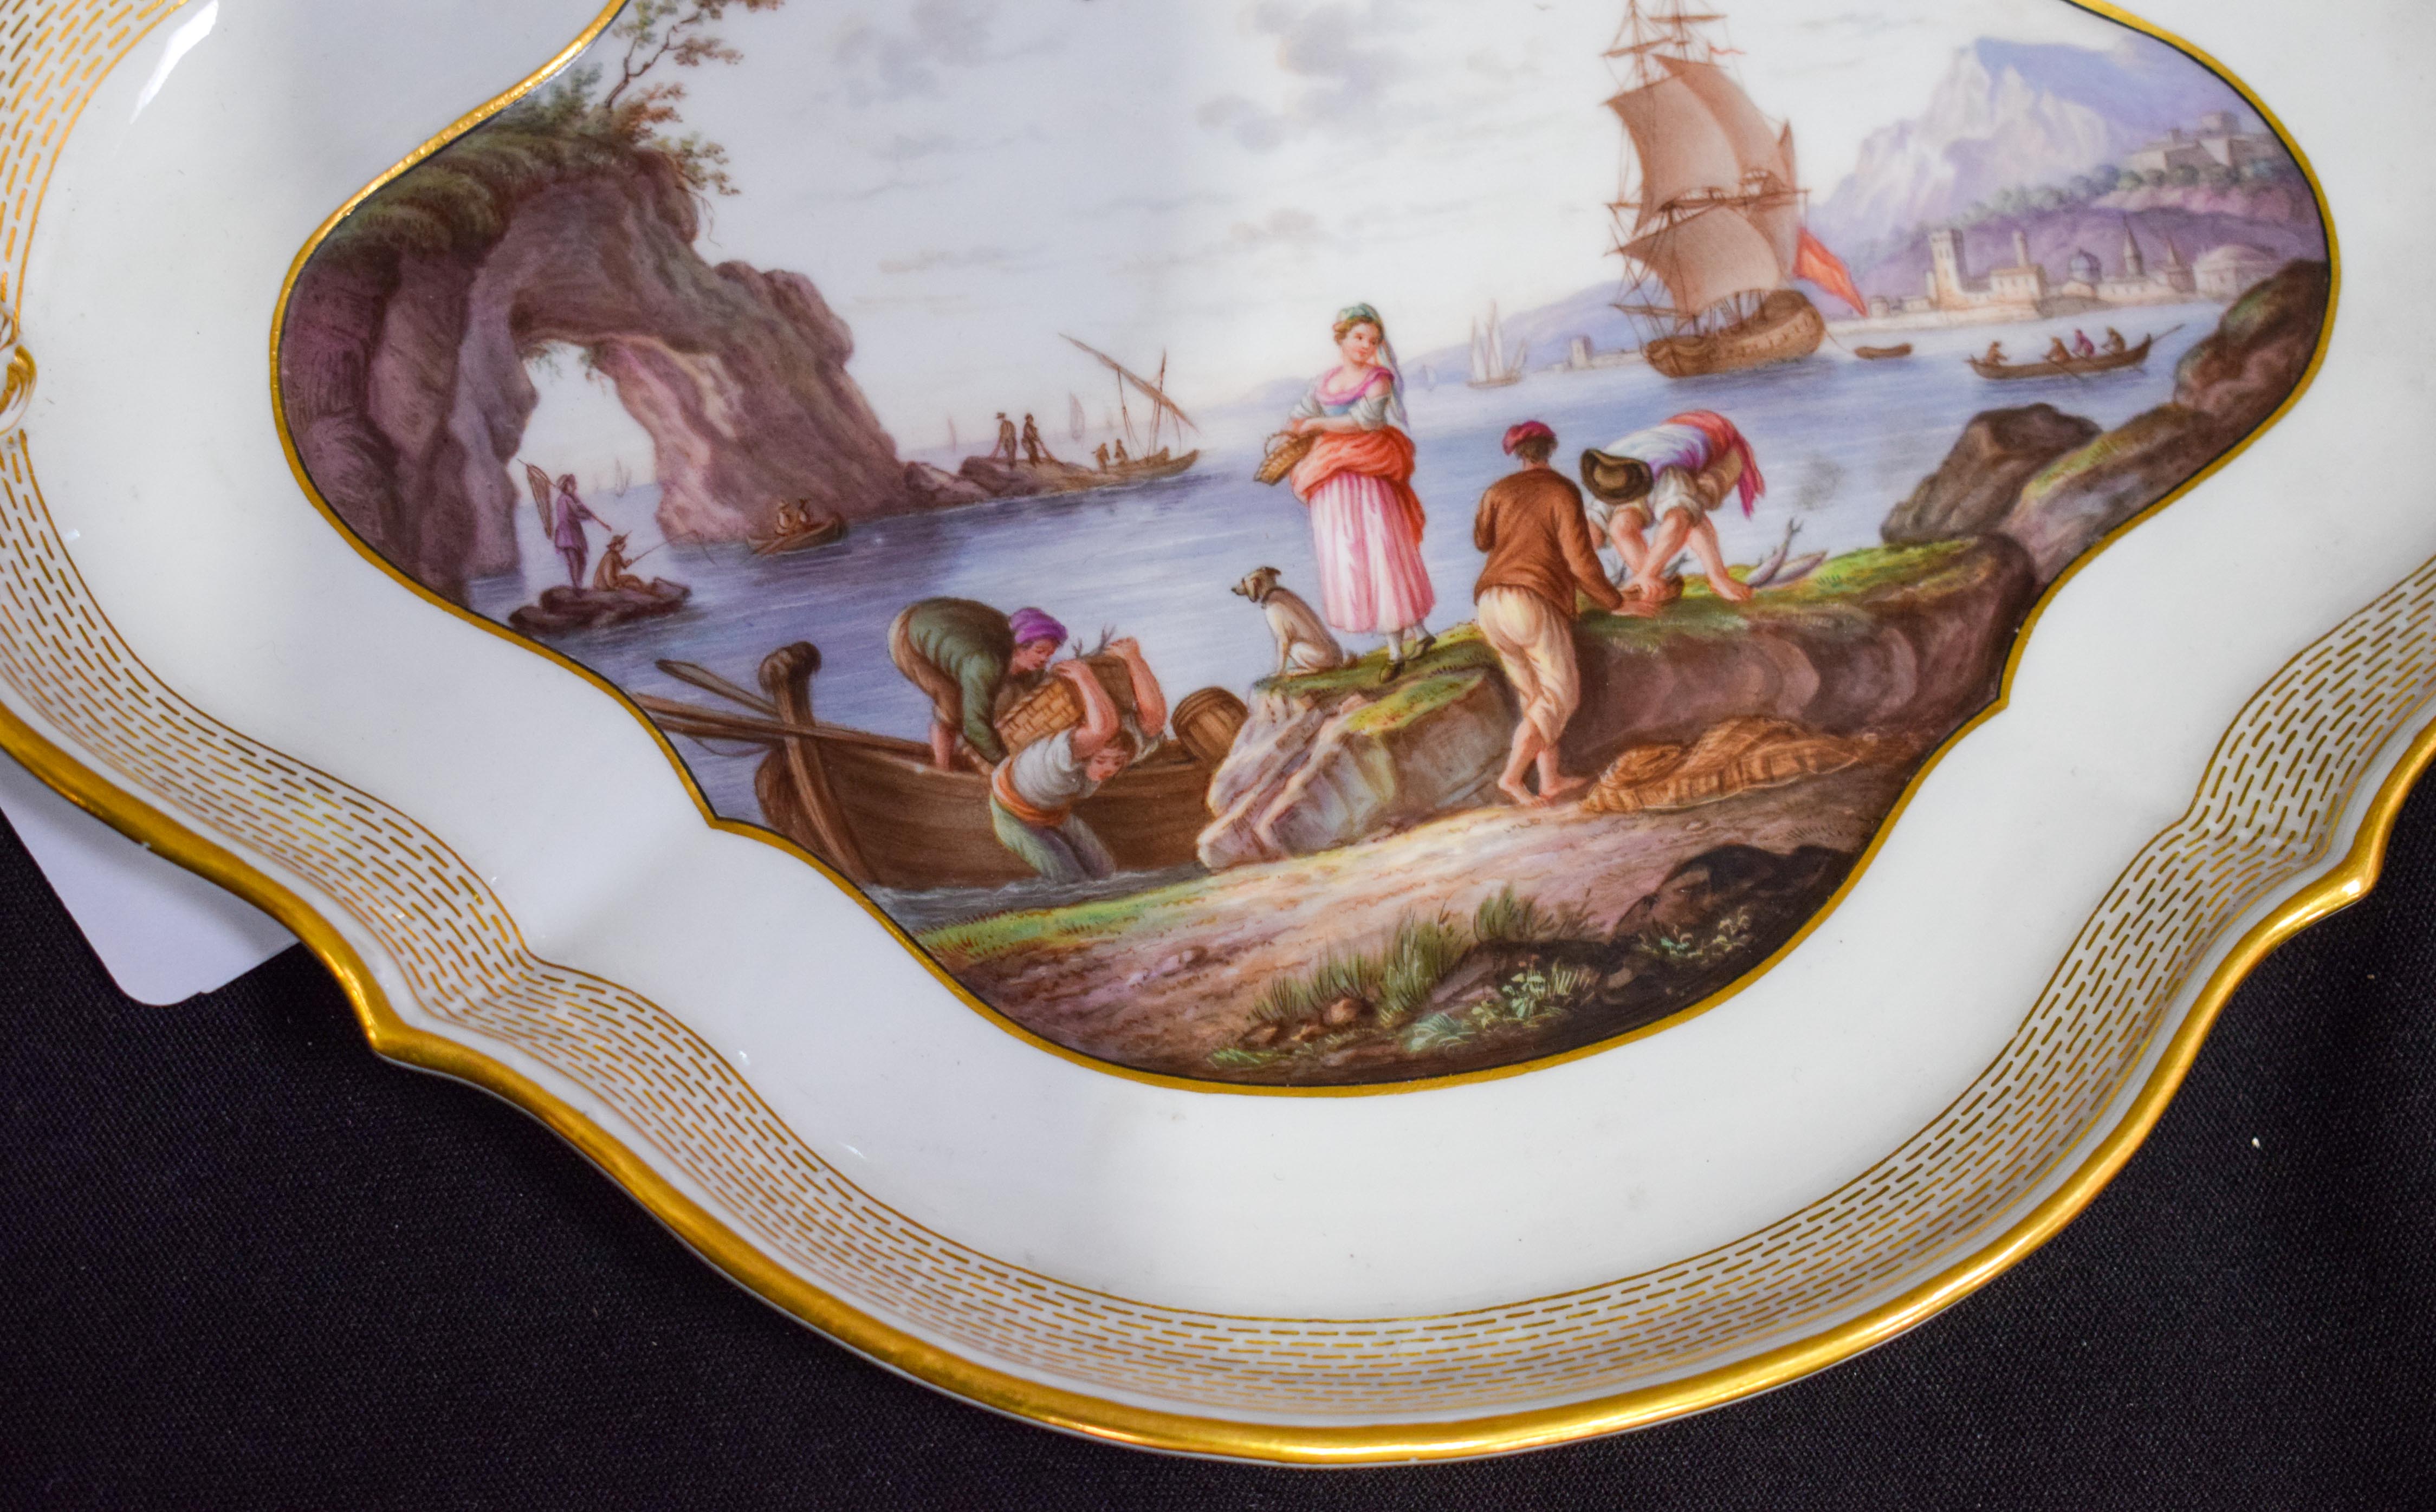 A FINE PAIR OF 18TH/19TH CENTURY MEISSEN TWIN HANDLED PORCELAIN DISHES painted with coastal views. 2 - Image 15 of 19